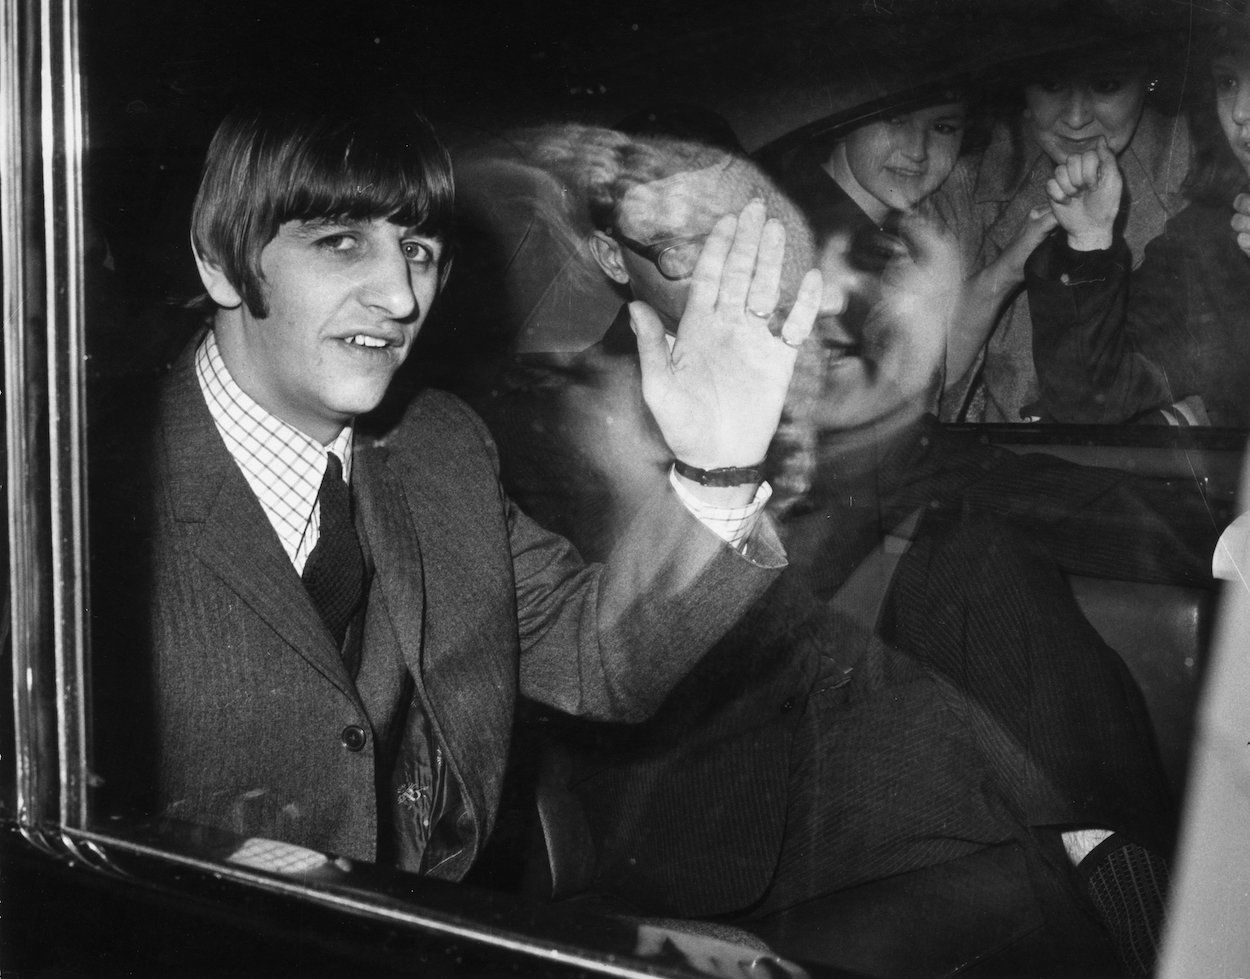 Ringo Starr, who once said he courted a very specific set of Beatles fans, waves from inside a car in 1964.